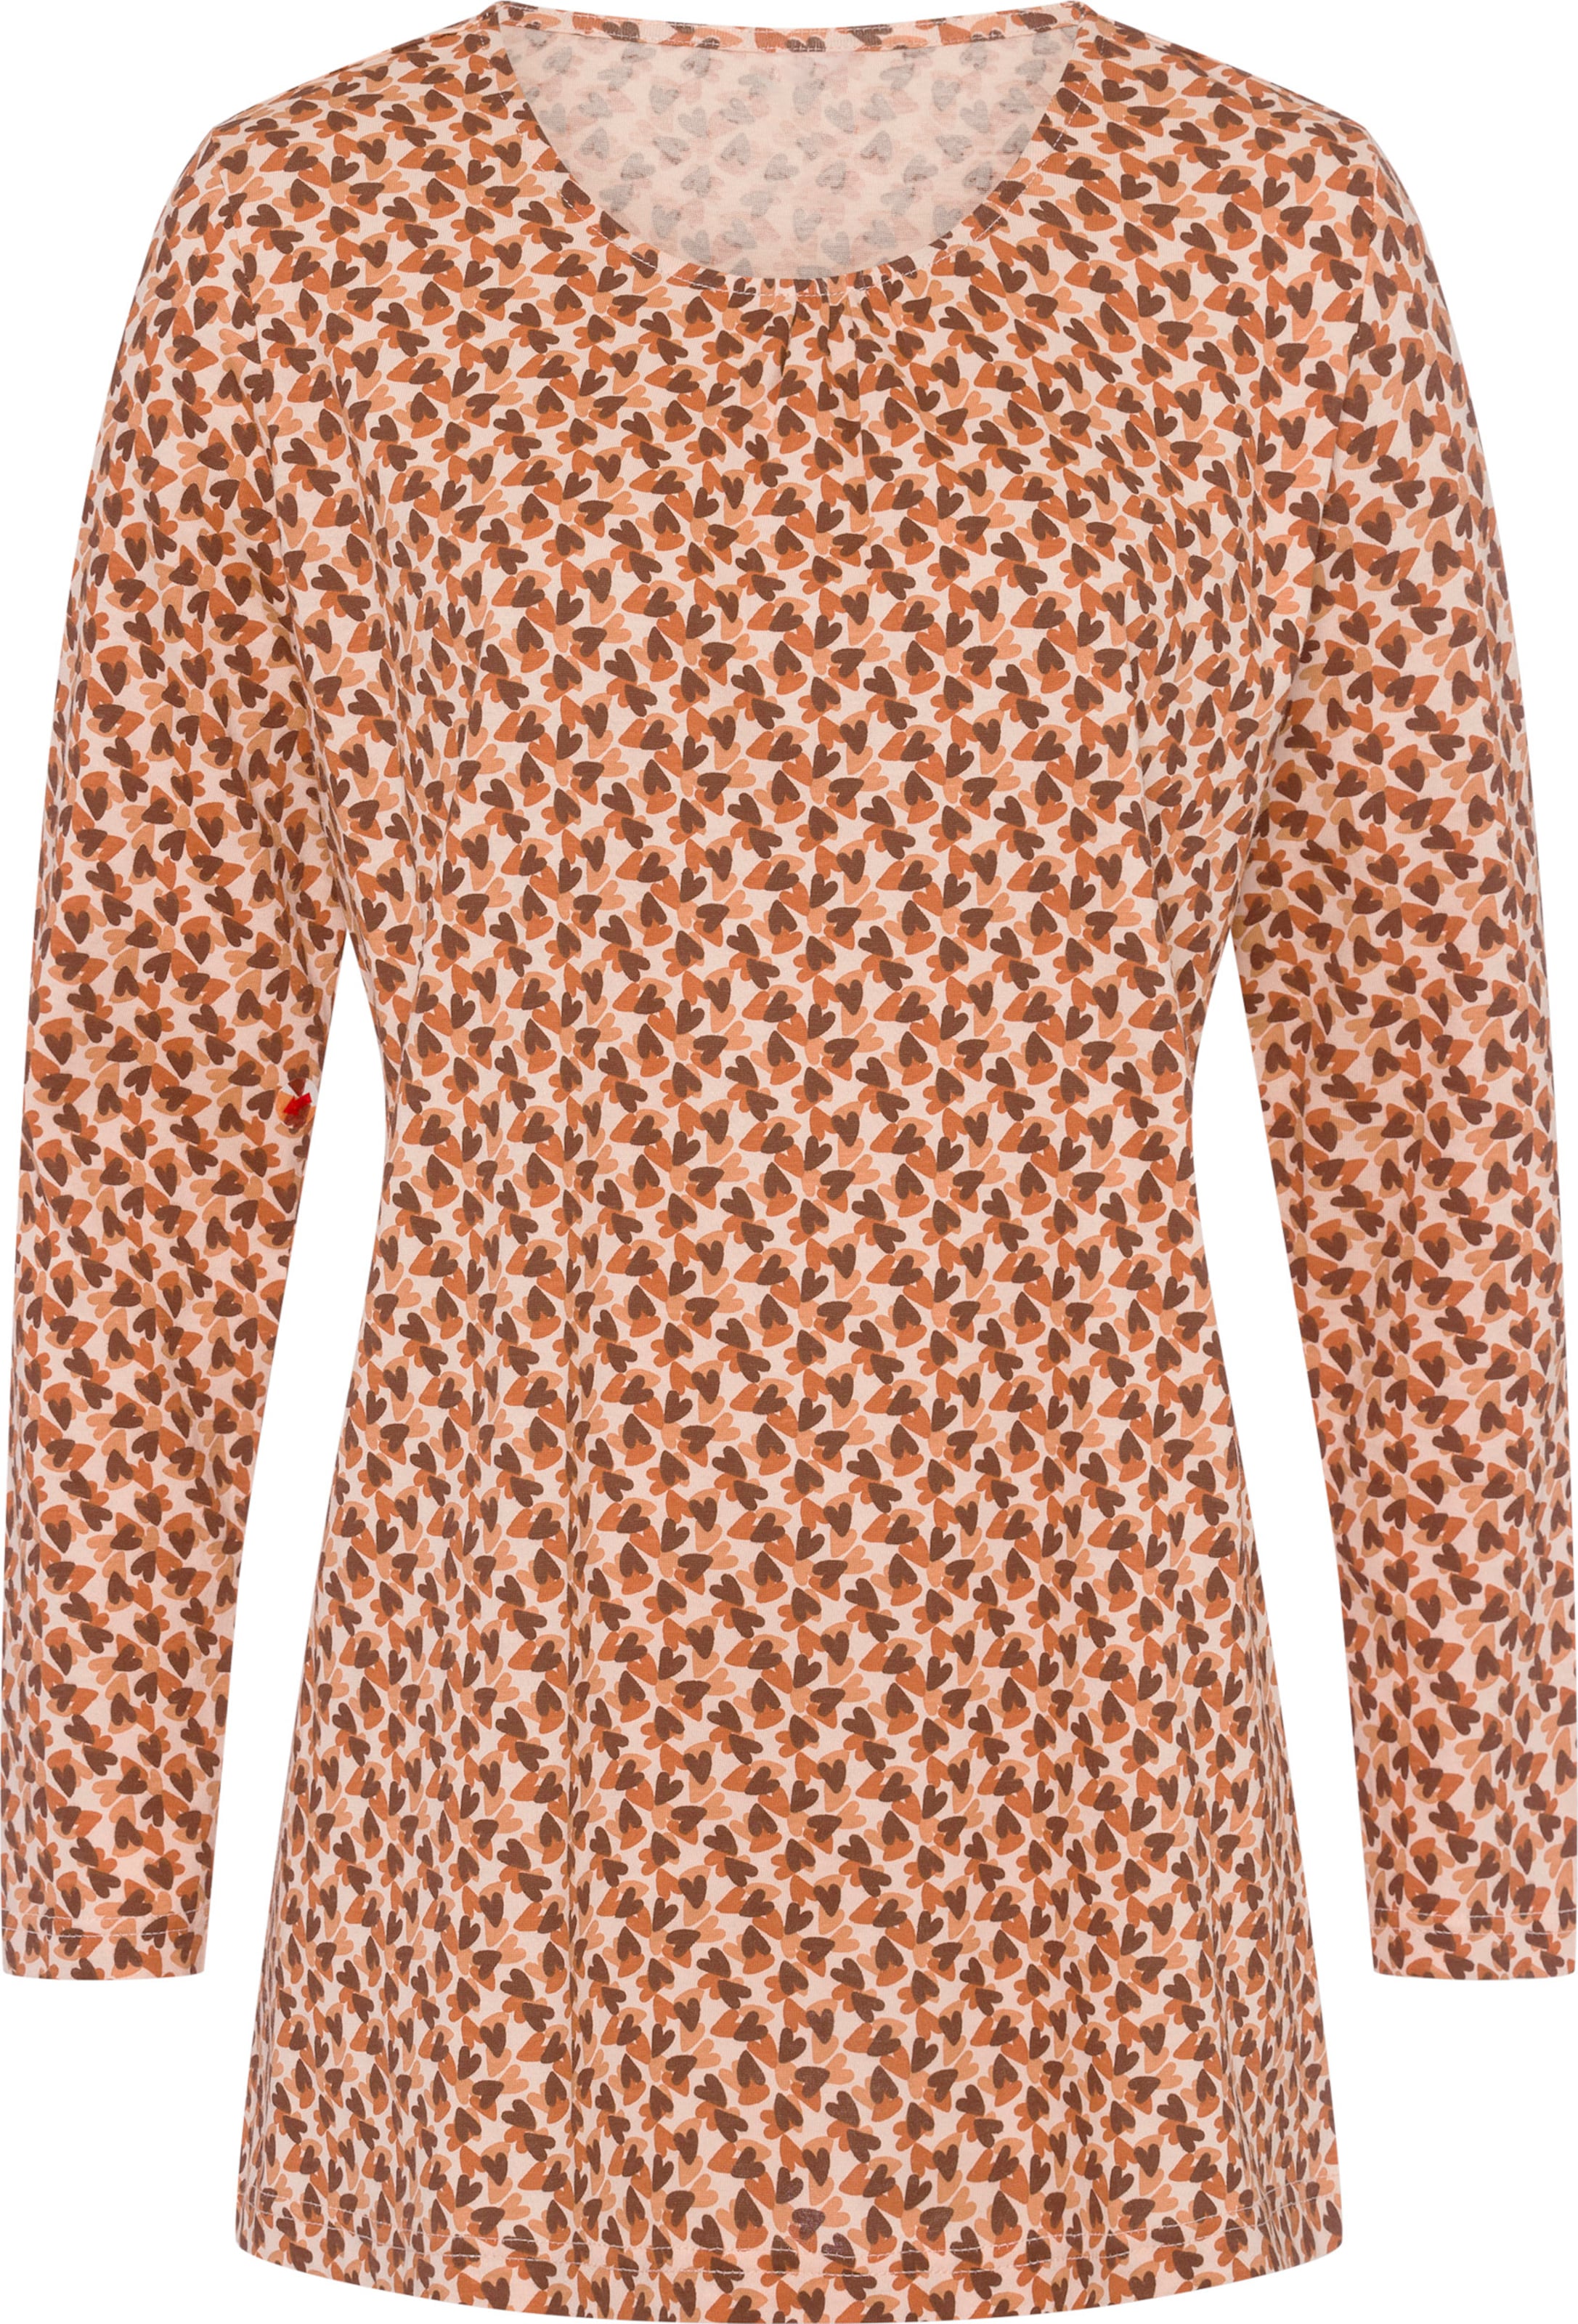 Your Look... for less! Dames Lang shirt apricot/roestrood bedrukt Maat